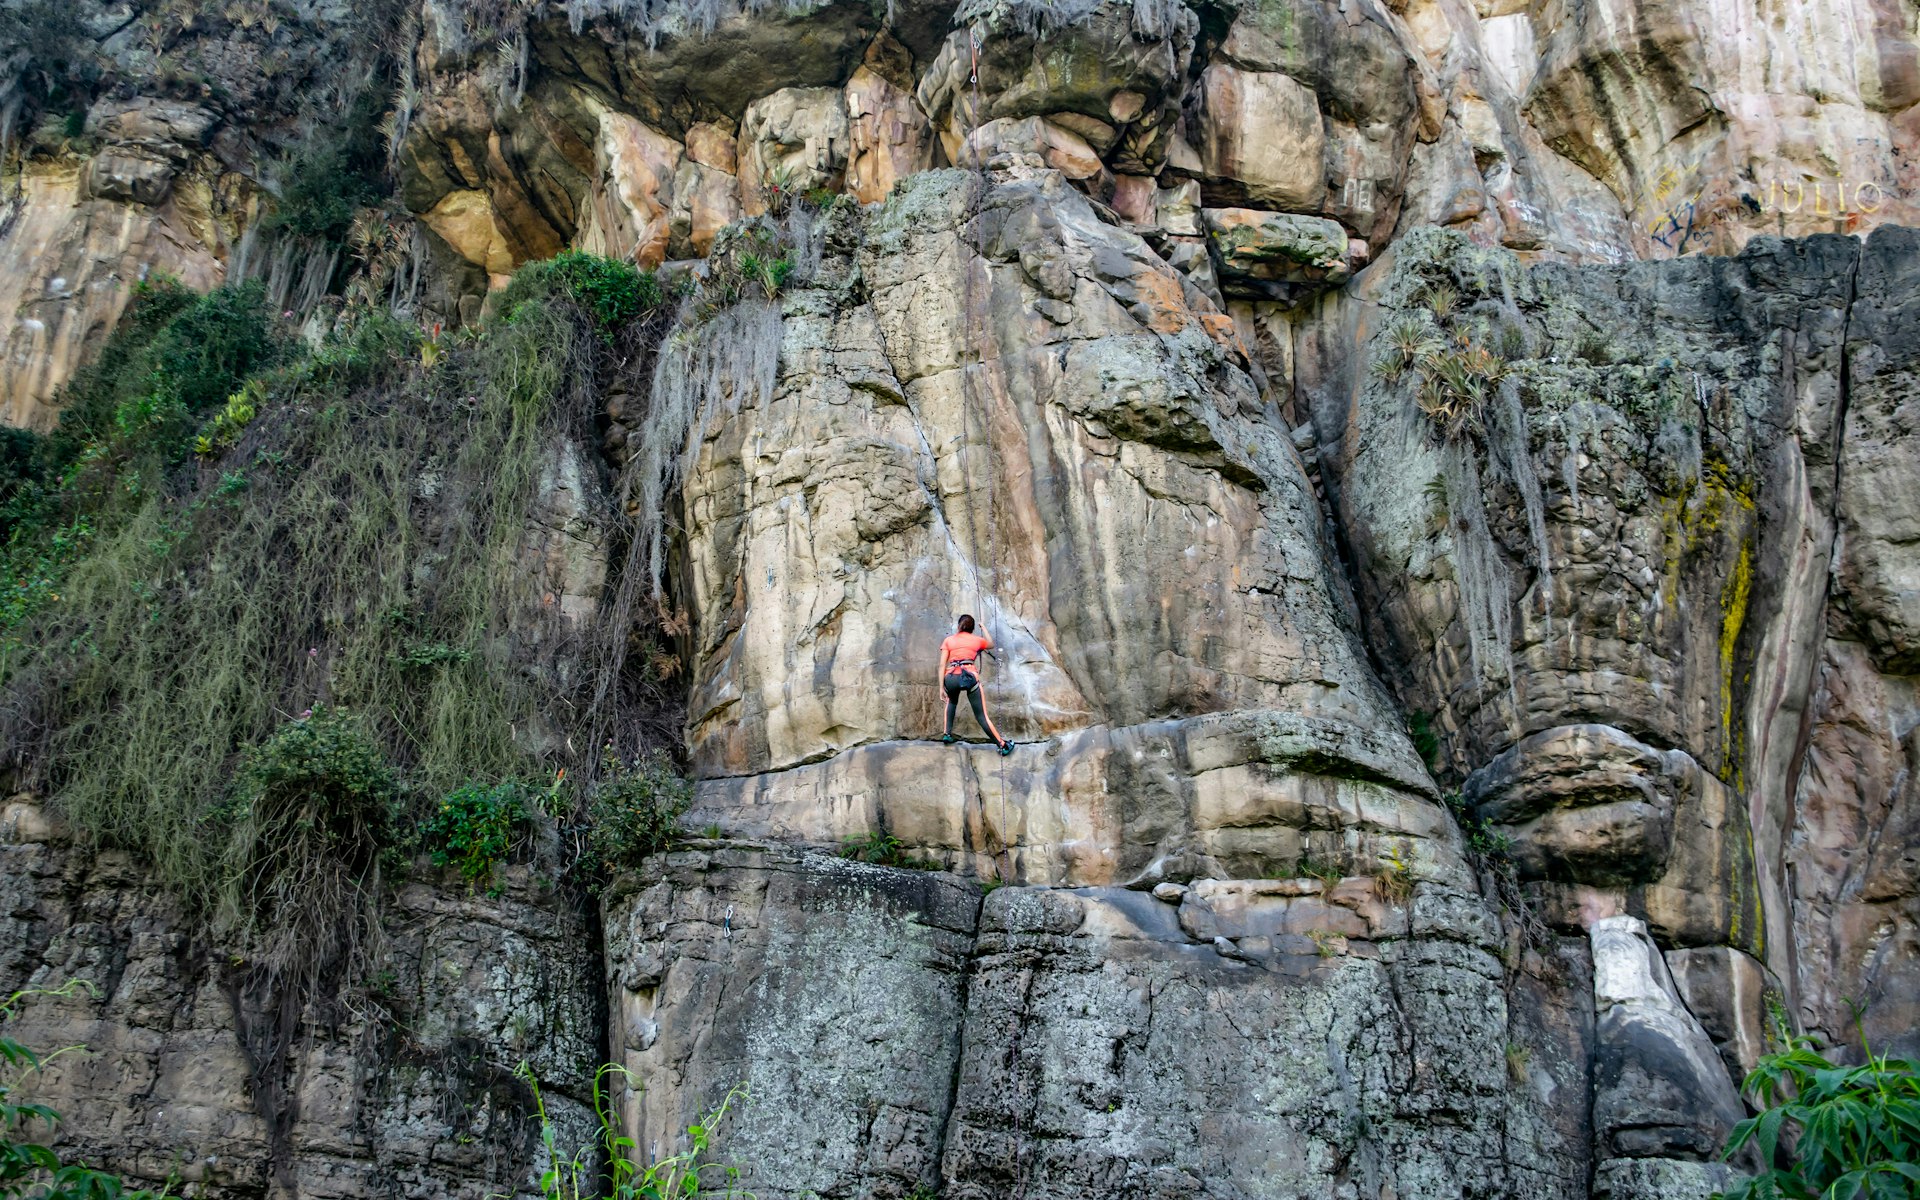 Female rock climber on one of the stone walls in Suesca.